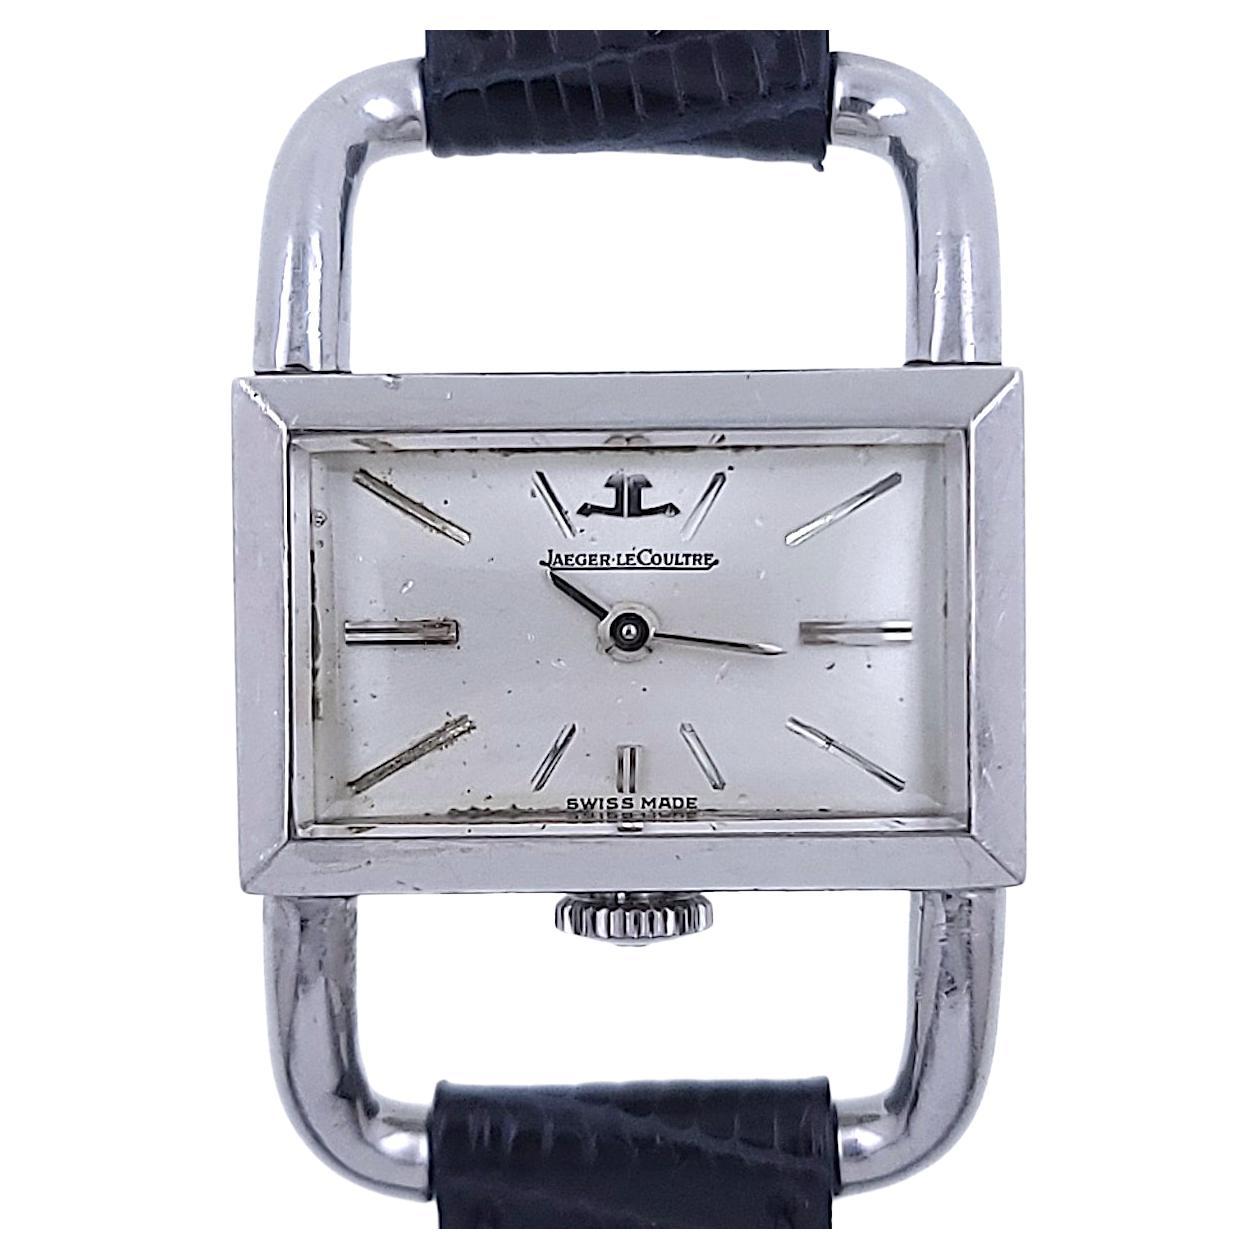 Jaeger-LeCoultre Etrier / Footing Model Steel Vintage circa 1960 Fully Serviced For Sale